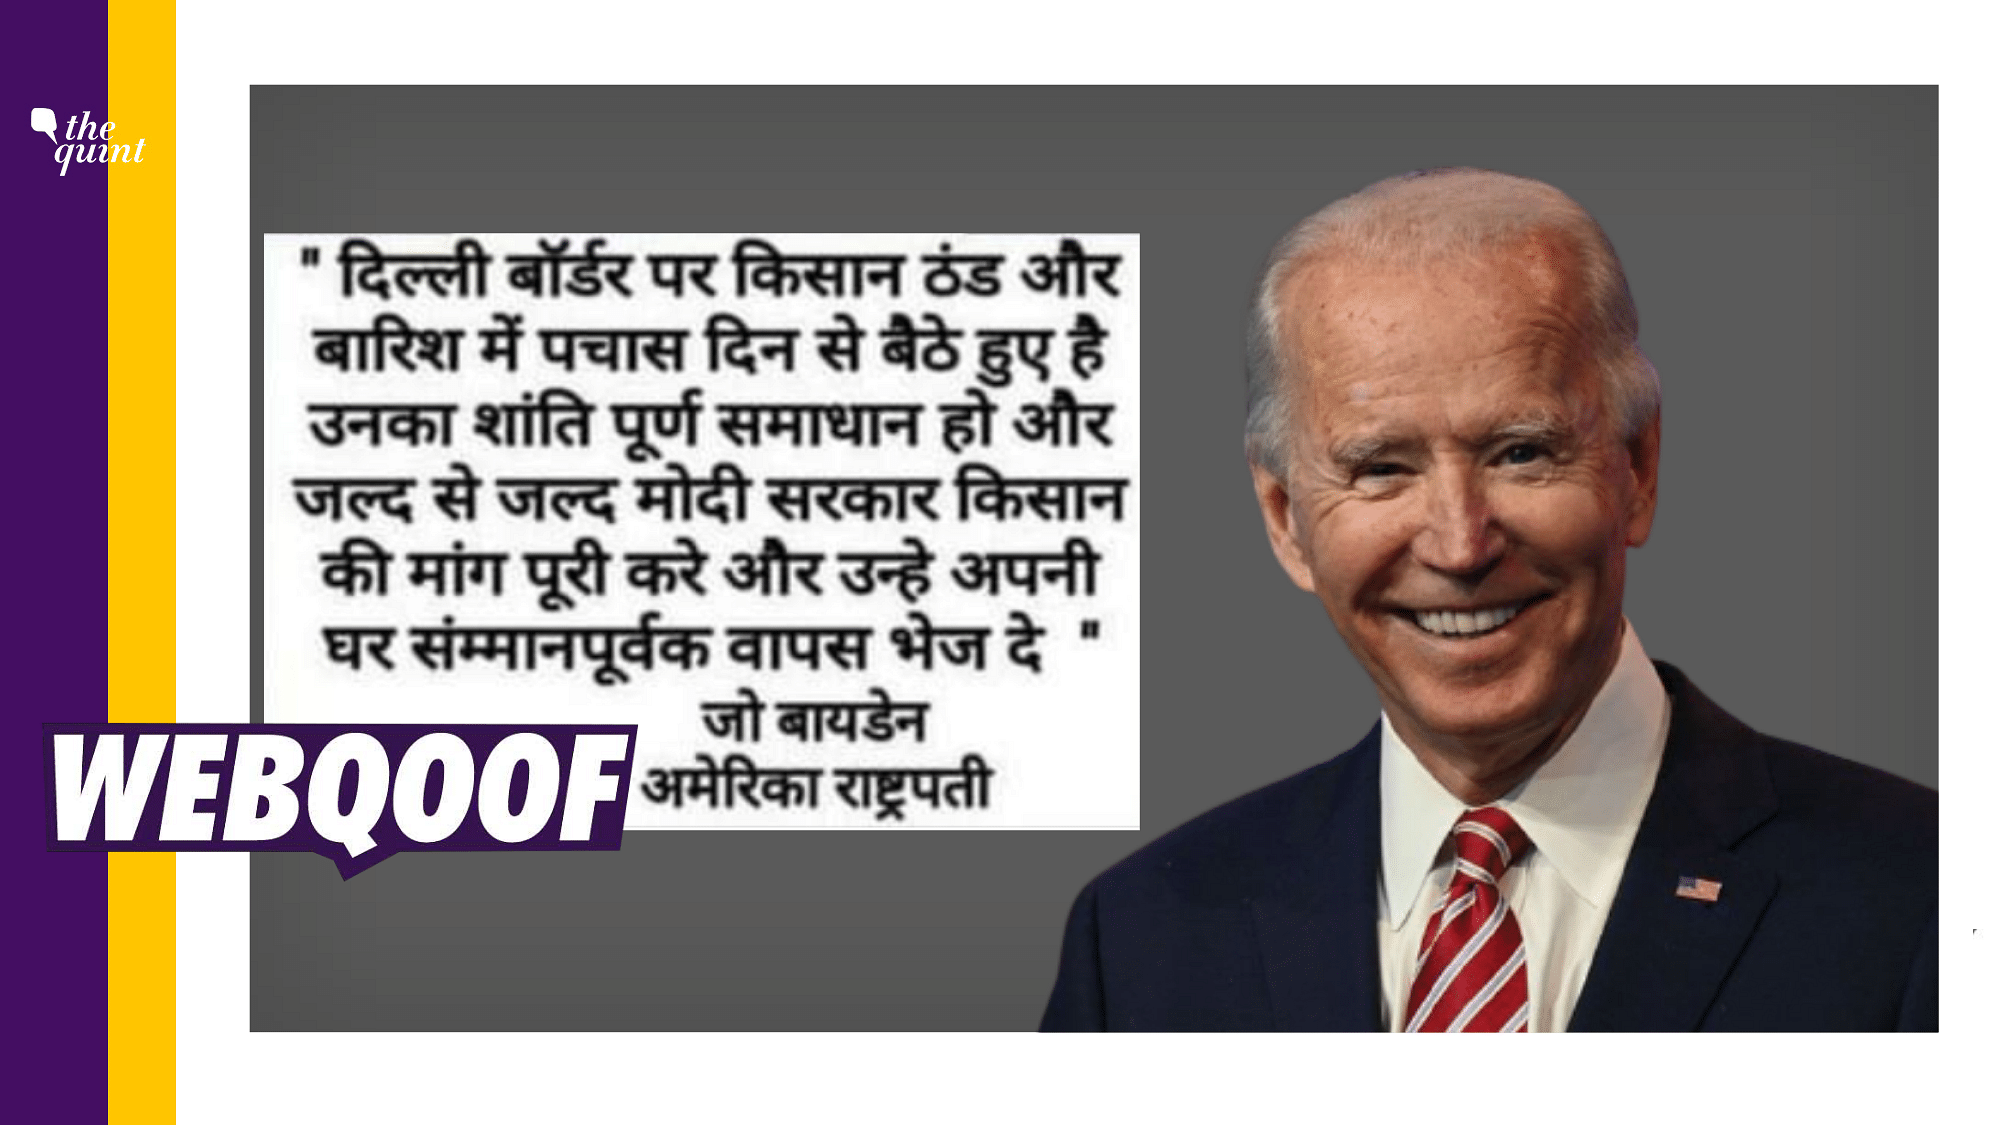 Fact-Check on President Joe Biden | The newly elected United States President Joe Biden has not said anything in support of the the ongoing farmers’ protest in India.